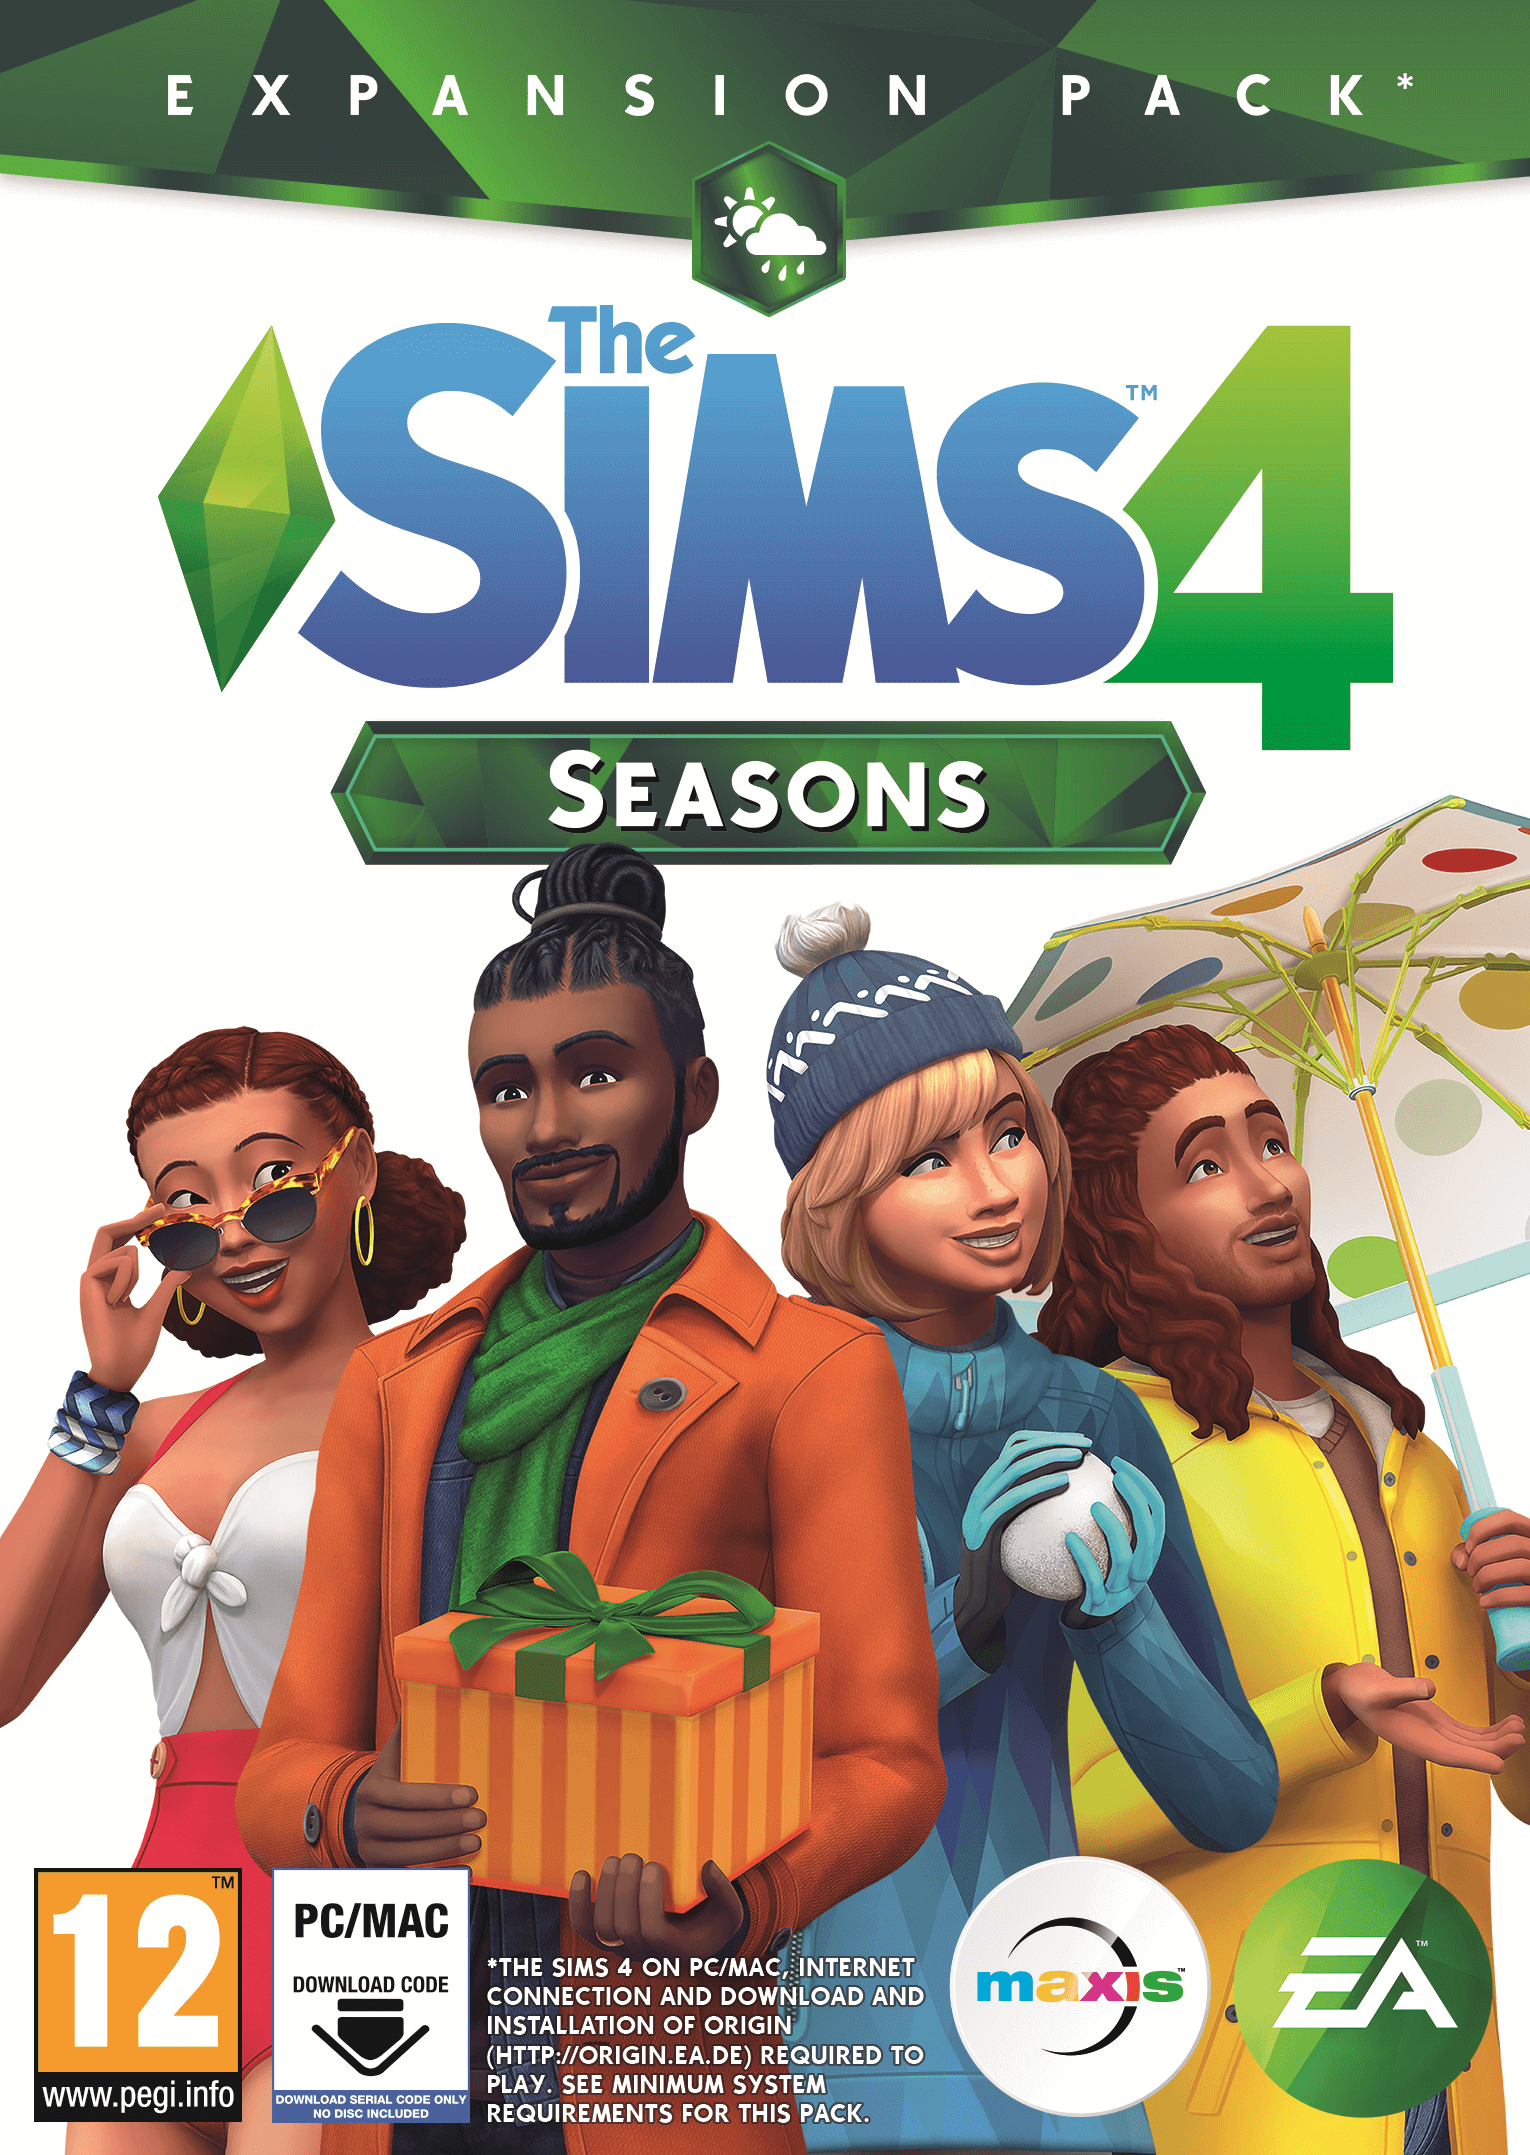 The Sims 4 Seasons Expansion Pack PC